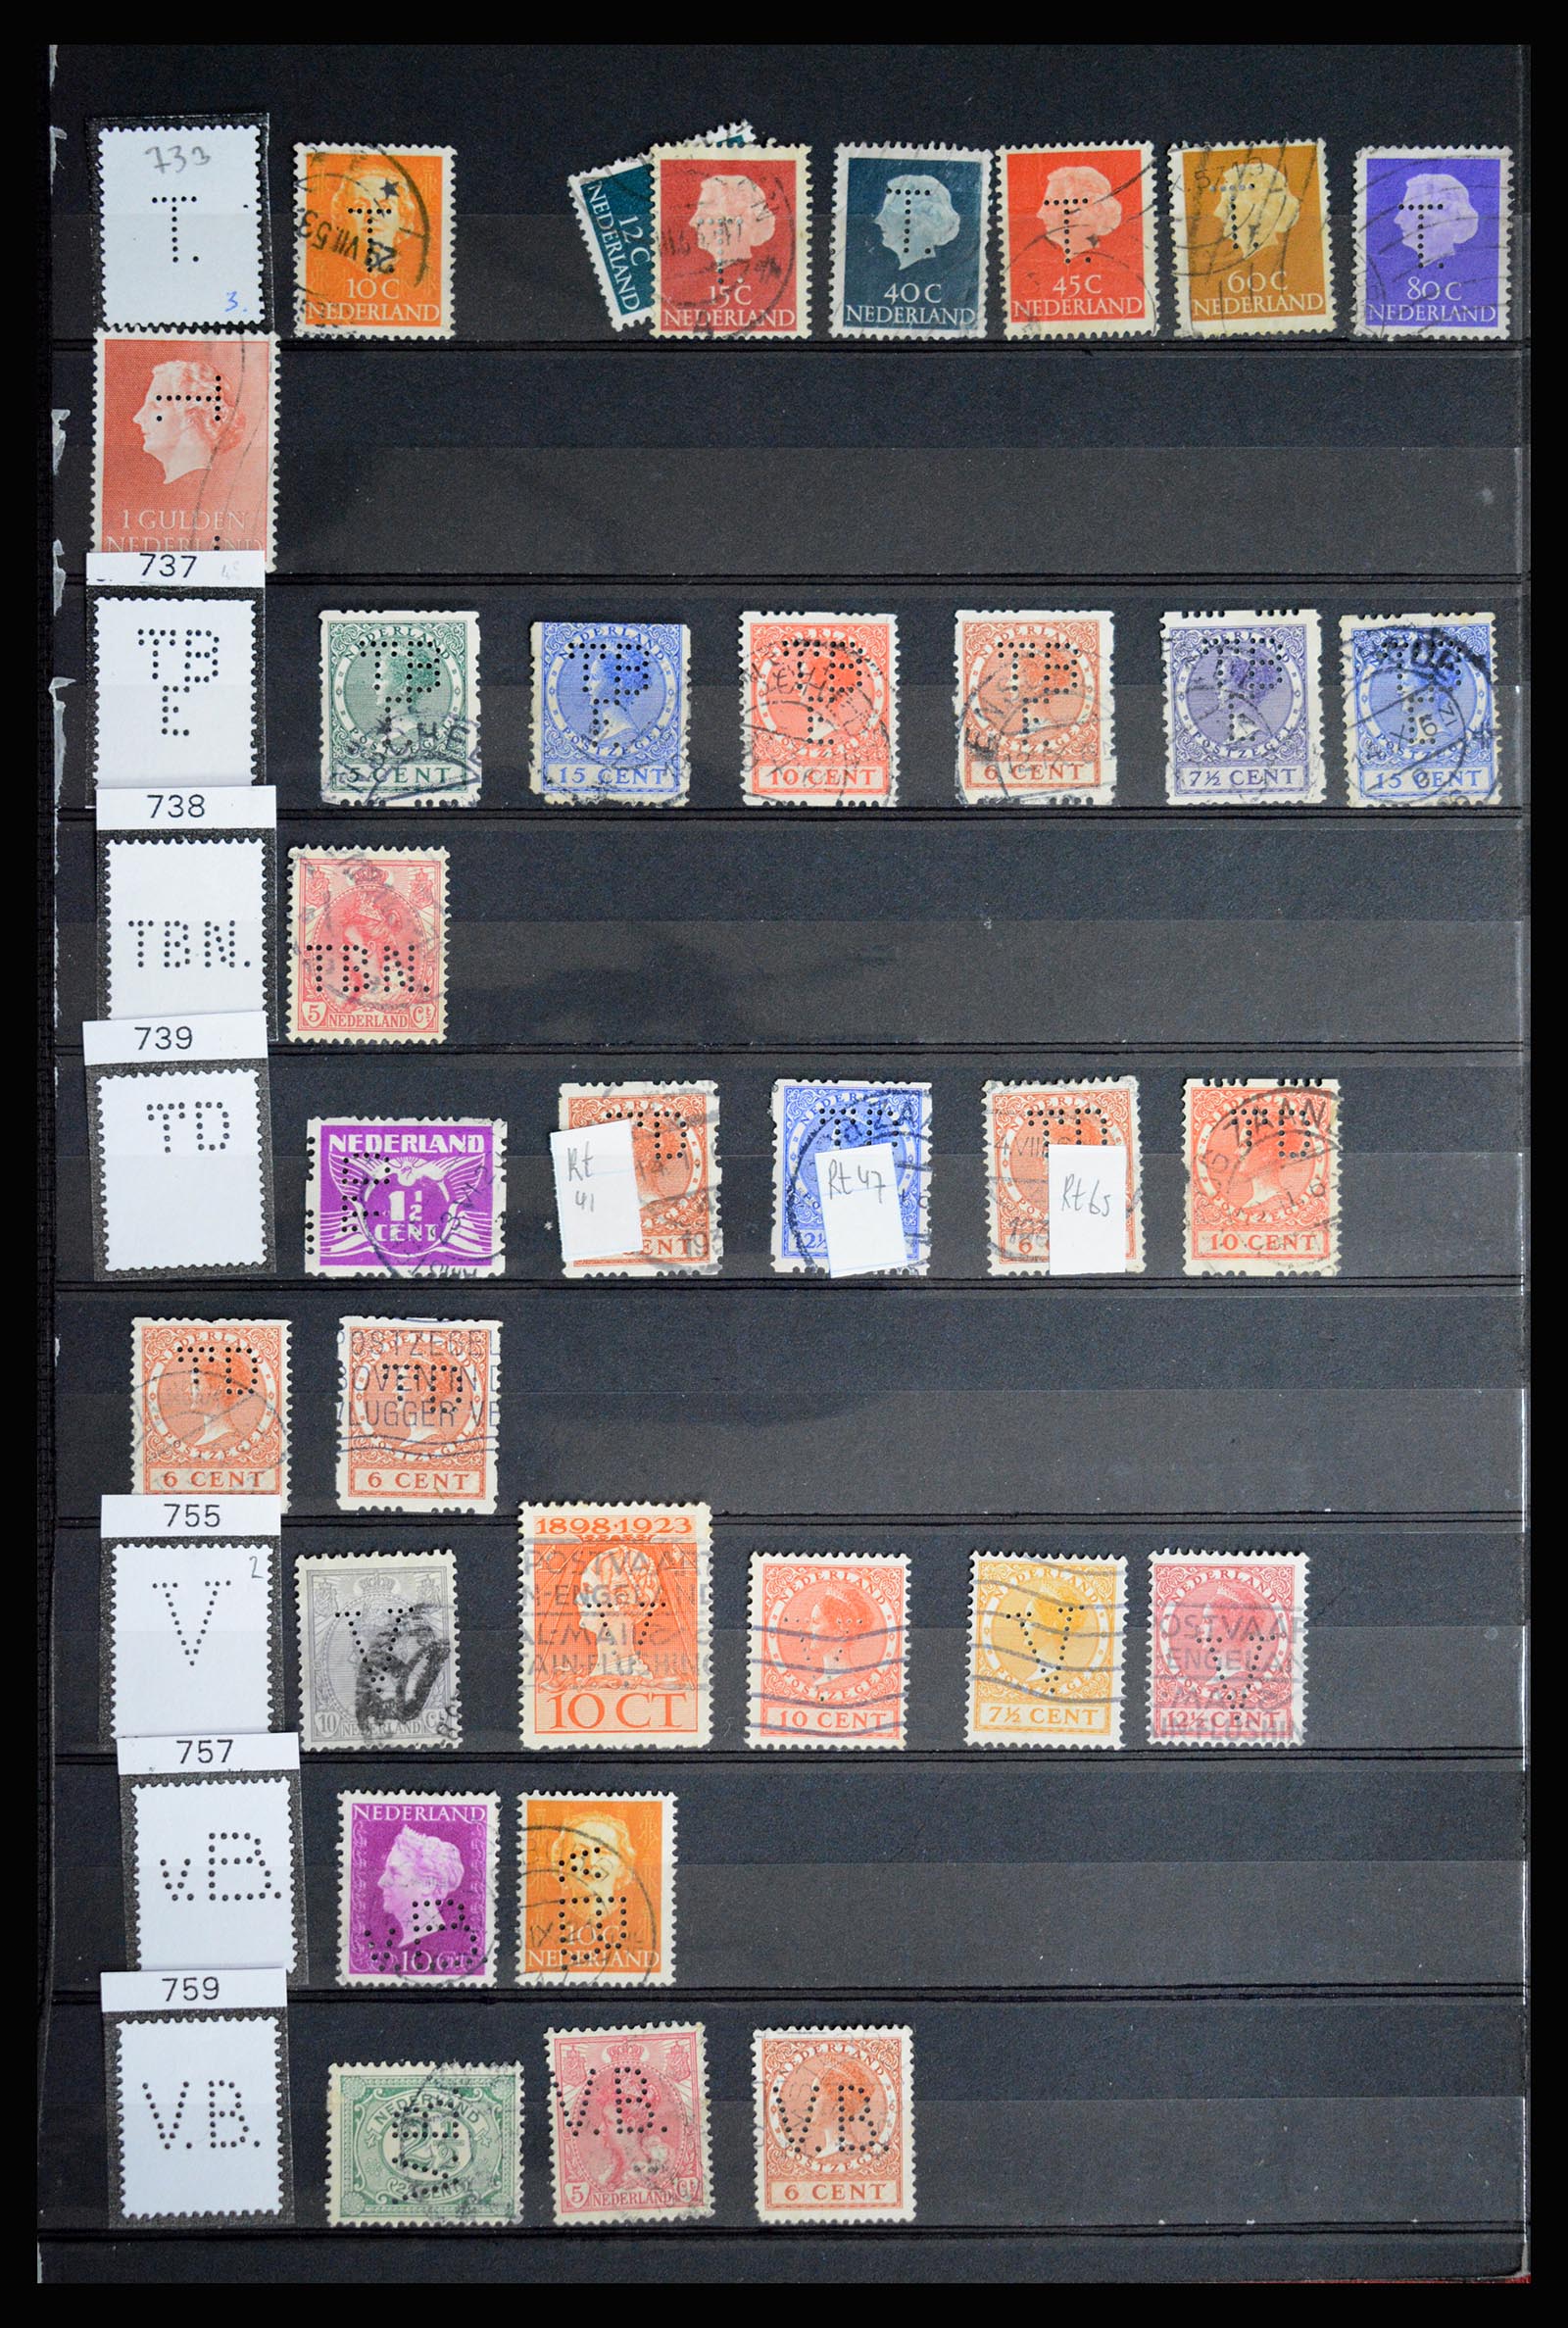 36849 073 - Stamp collection 36849 Netherlands perfins 1891-1960.